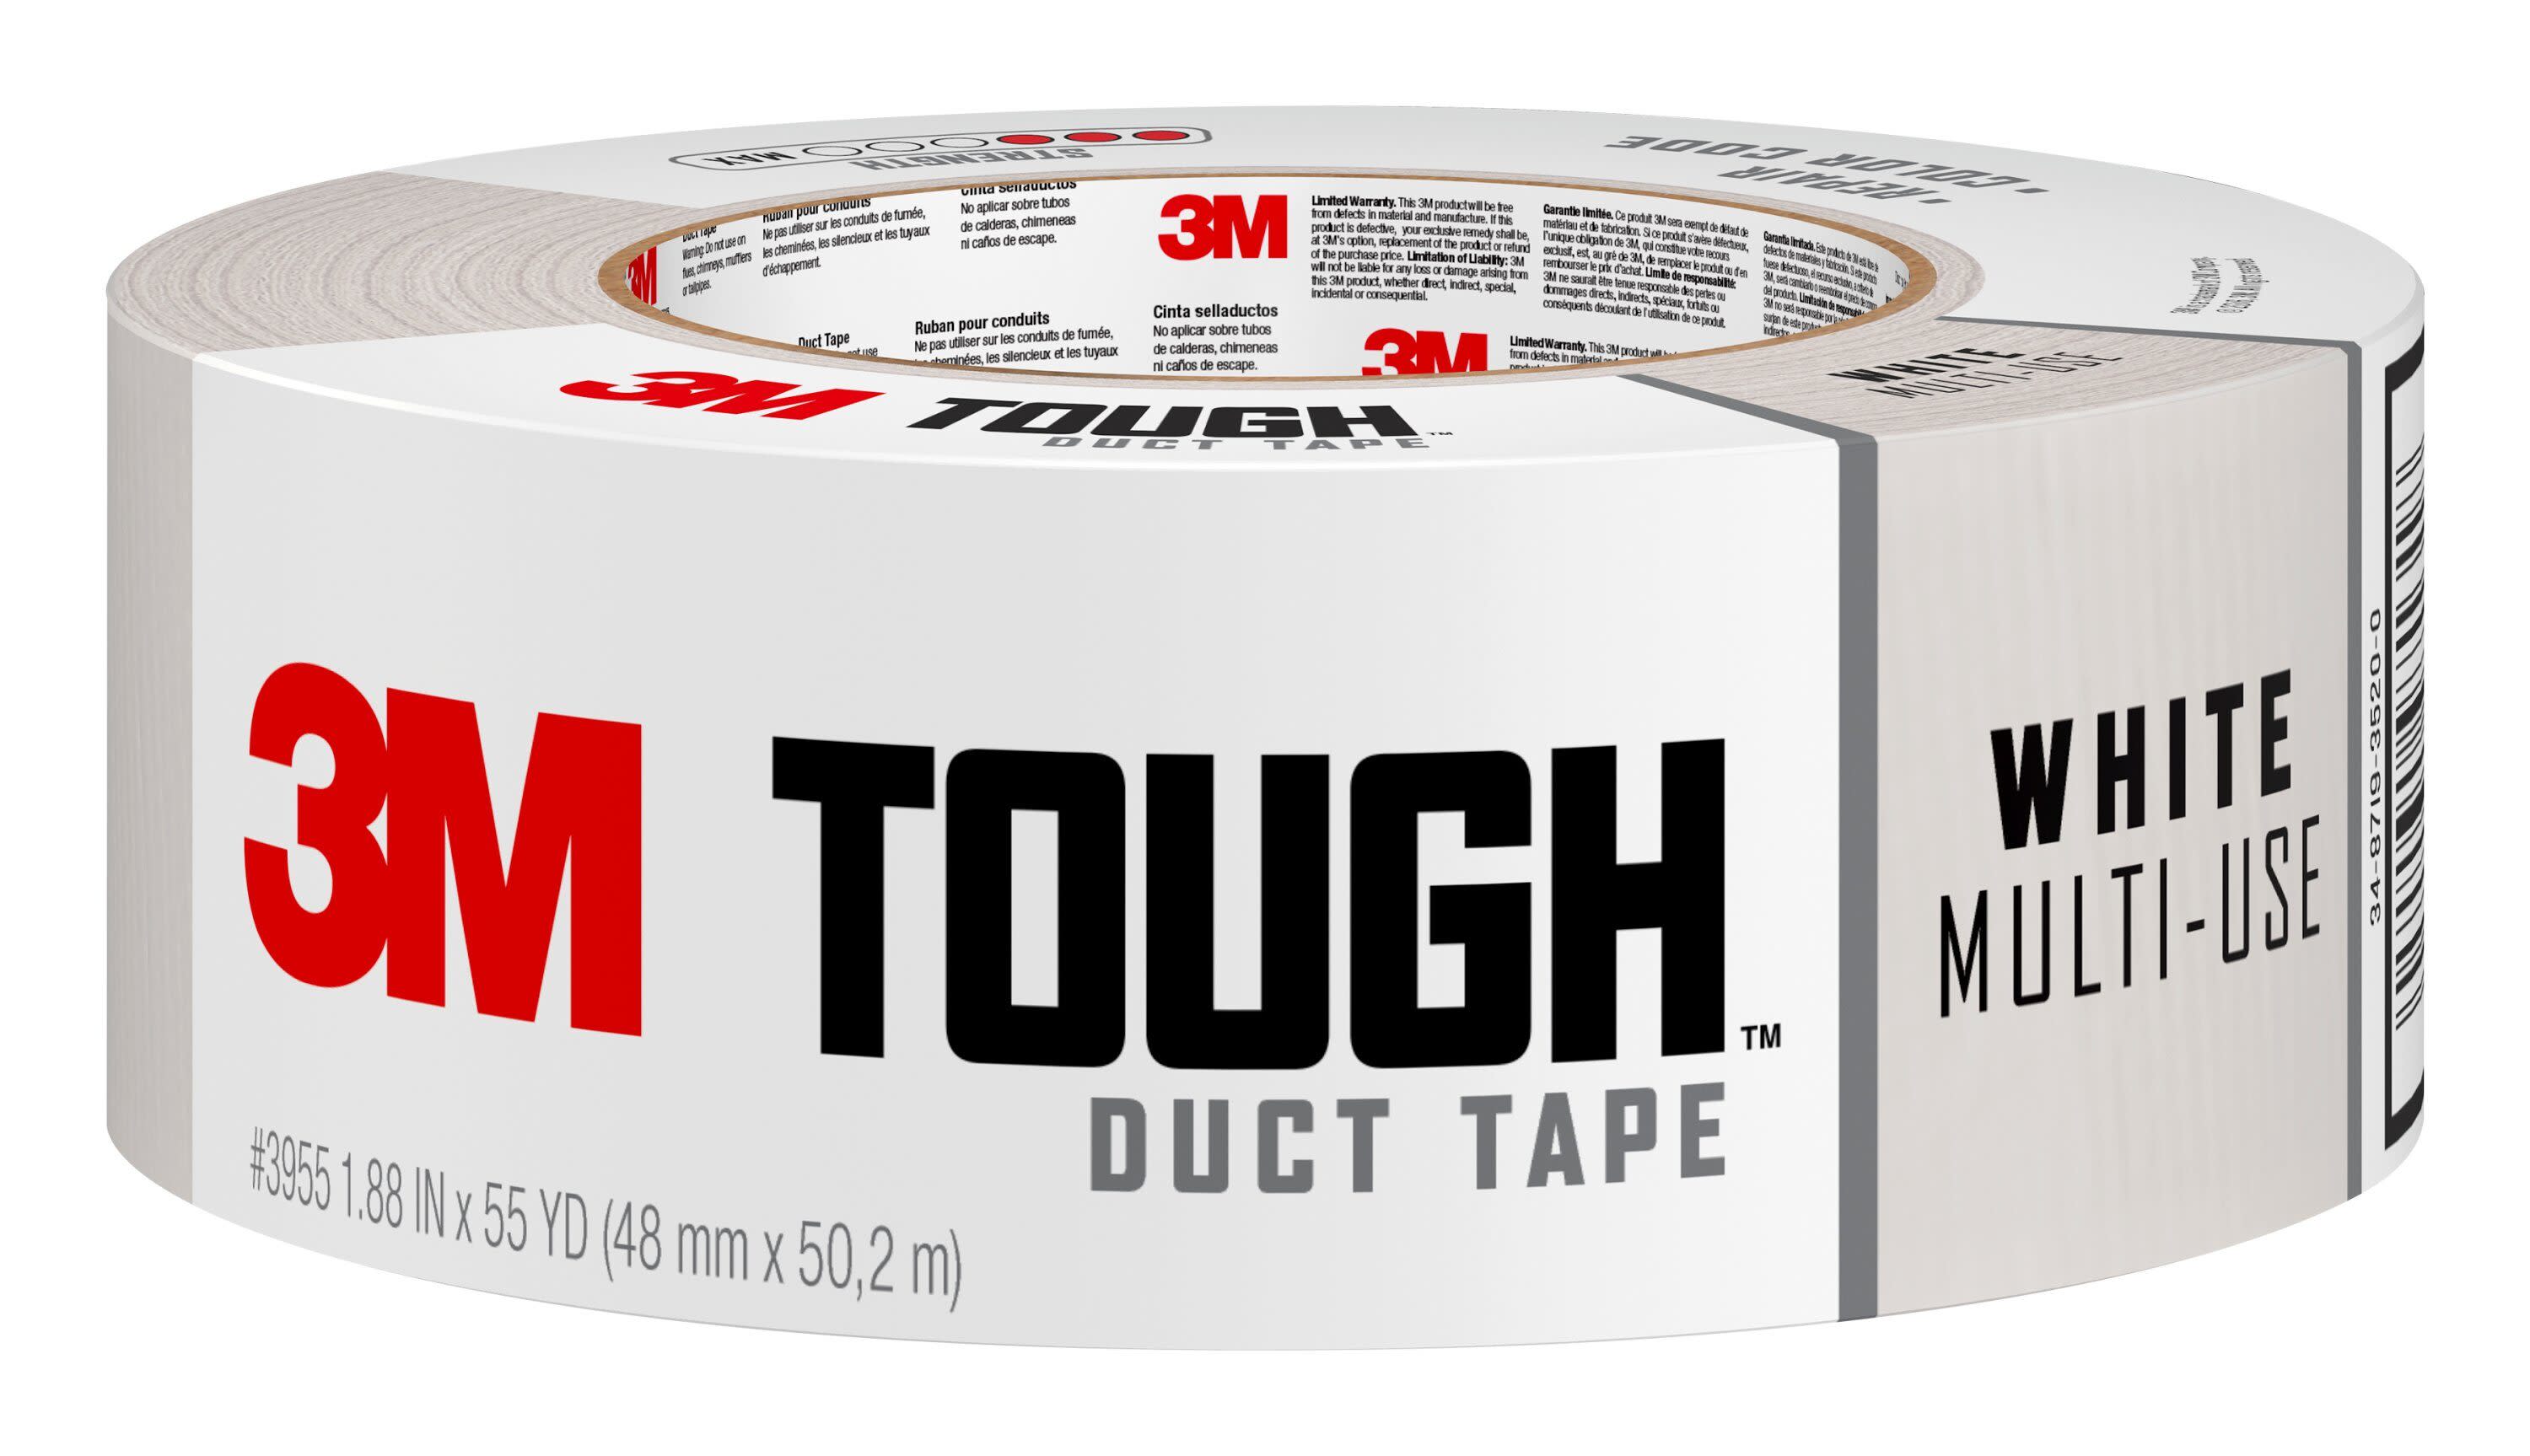 4 COUNT 3M DUCT TAPE BASIC 1.88 IN X 55 YD 